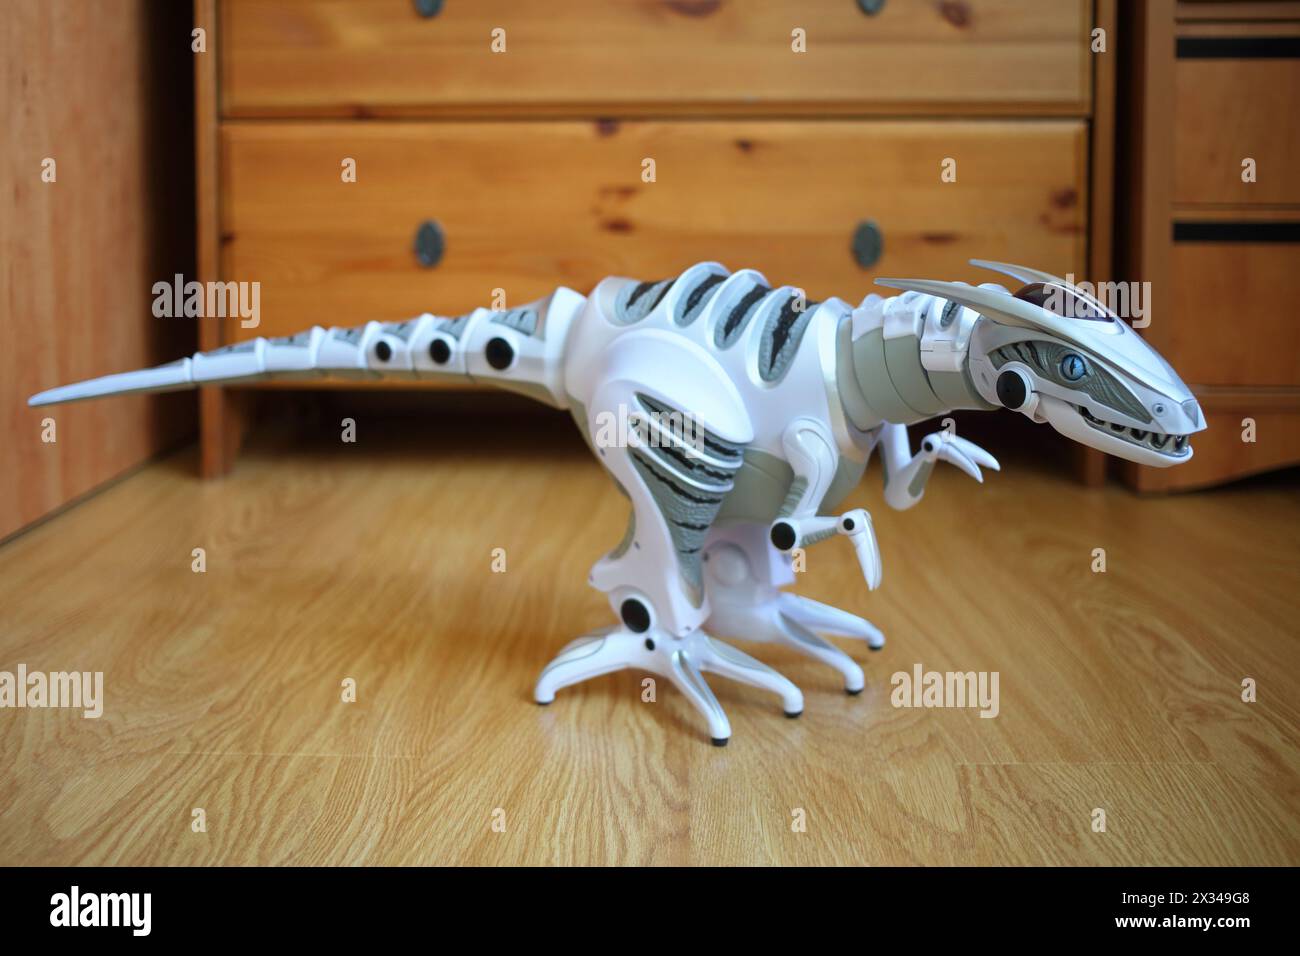 Interactive robot dinosaur standing on the floor in the room Stock Photo